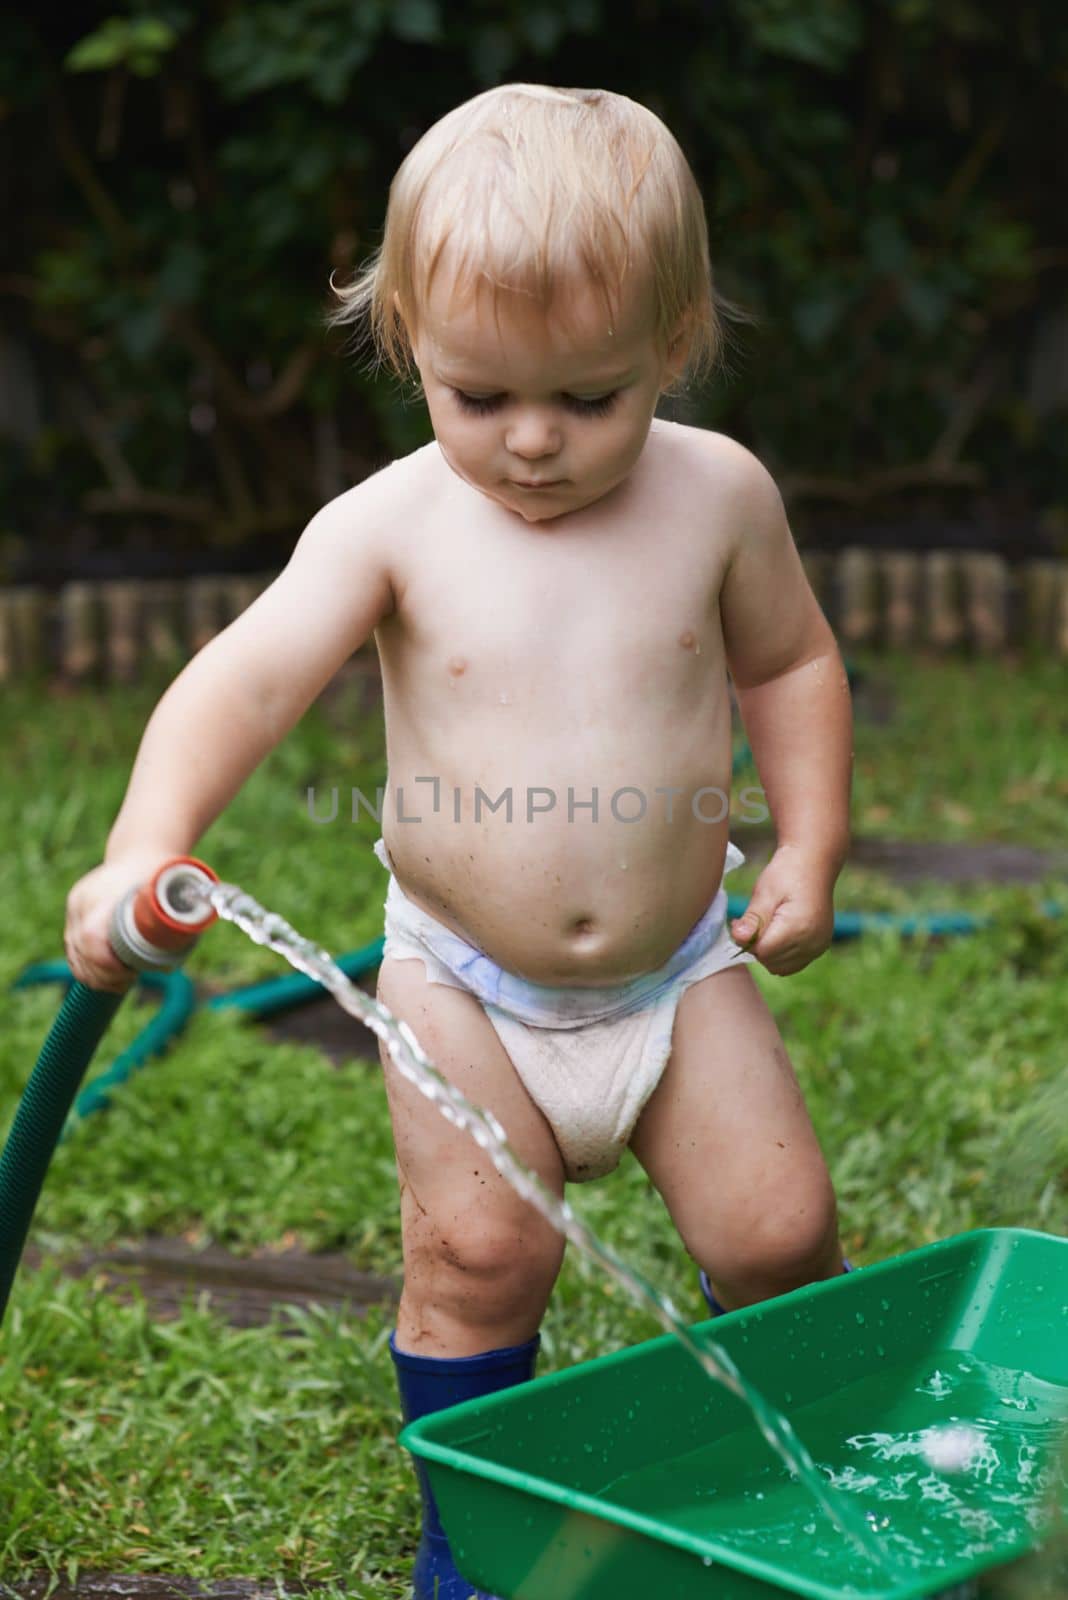 Inquisitive Baby. A baby in his nappy holding a hose pipe and pouting water into a gardening container